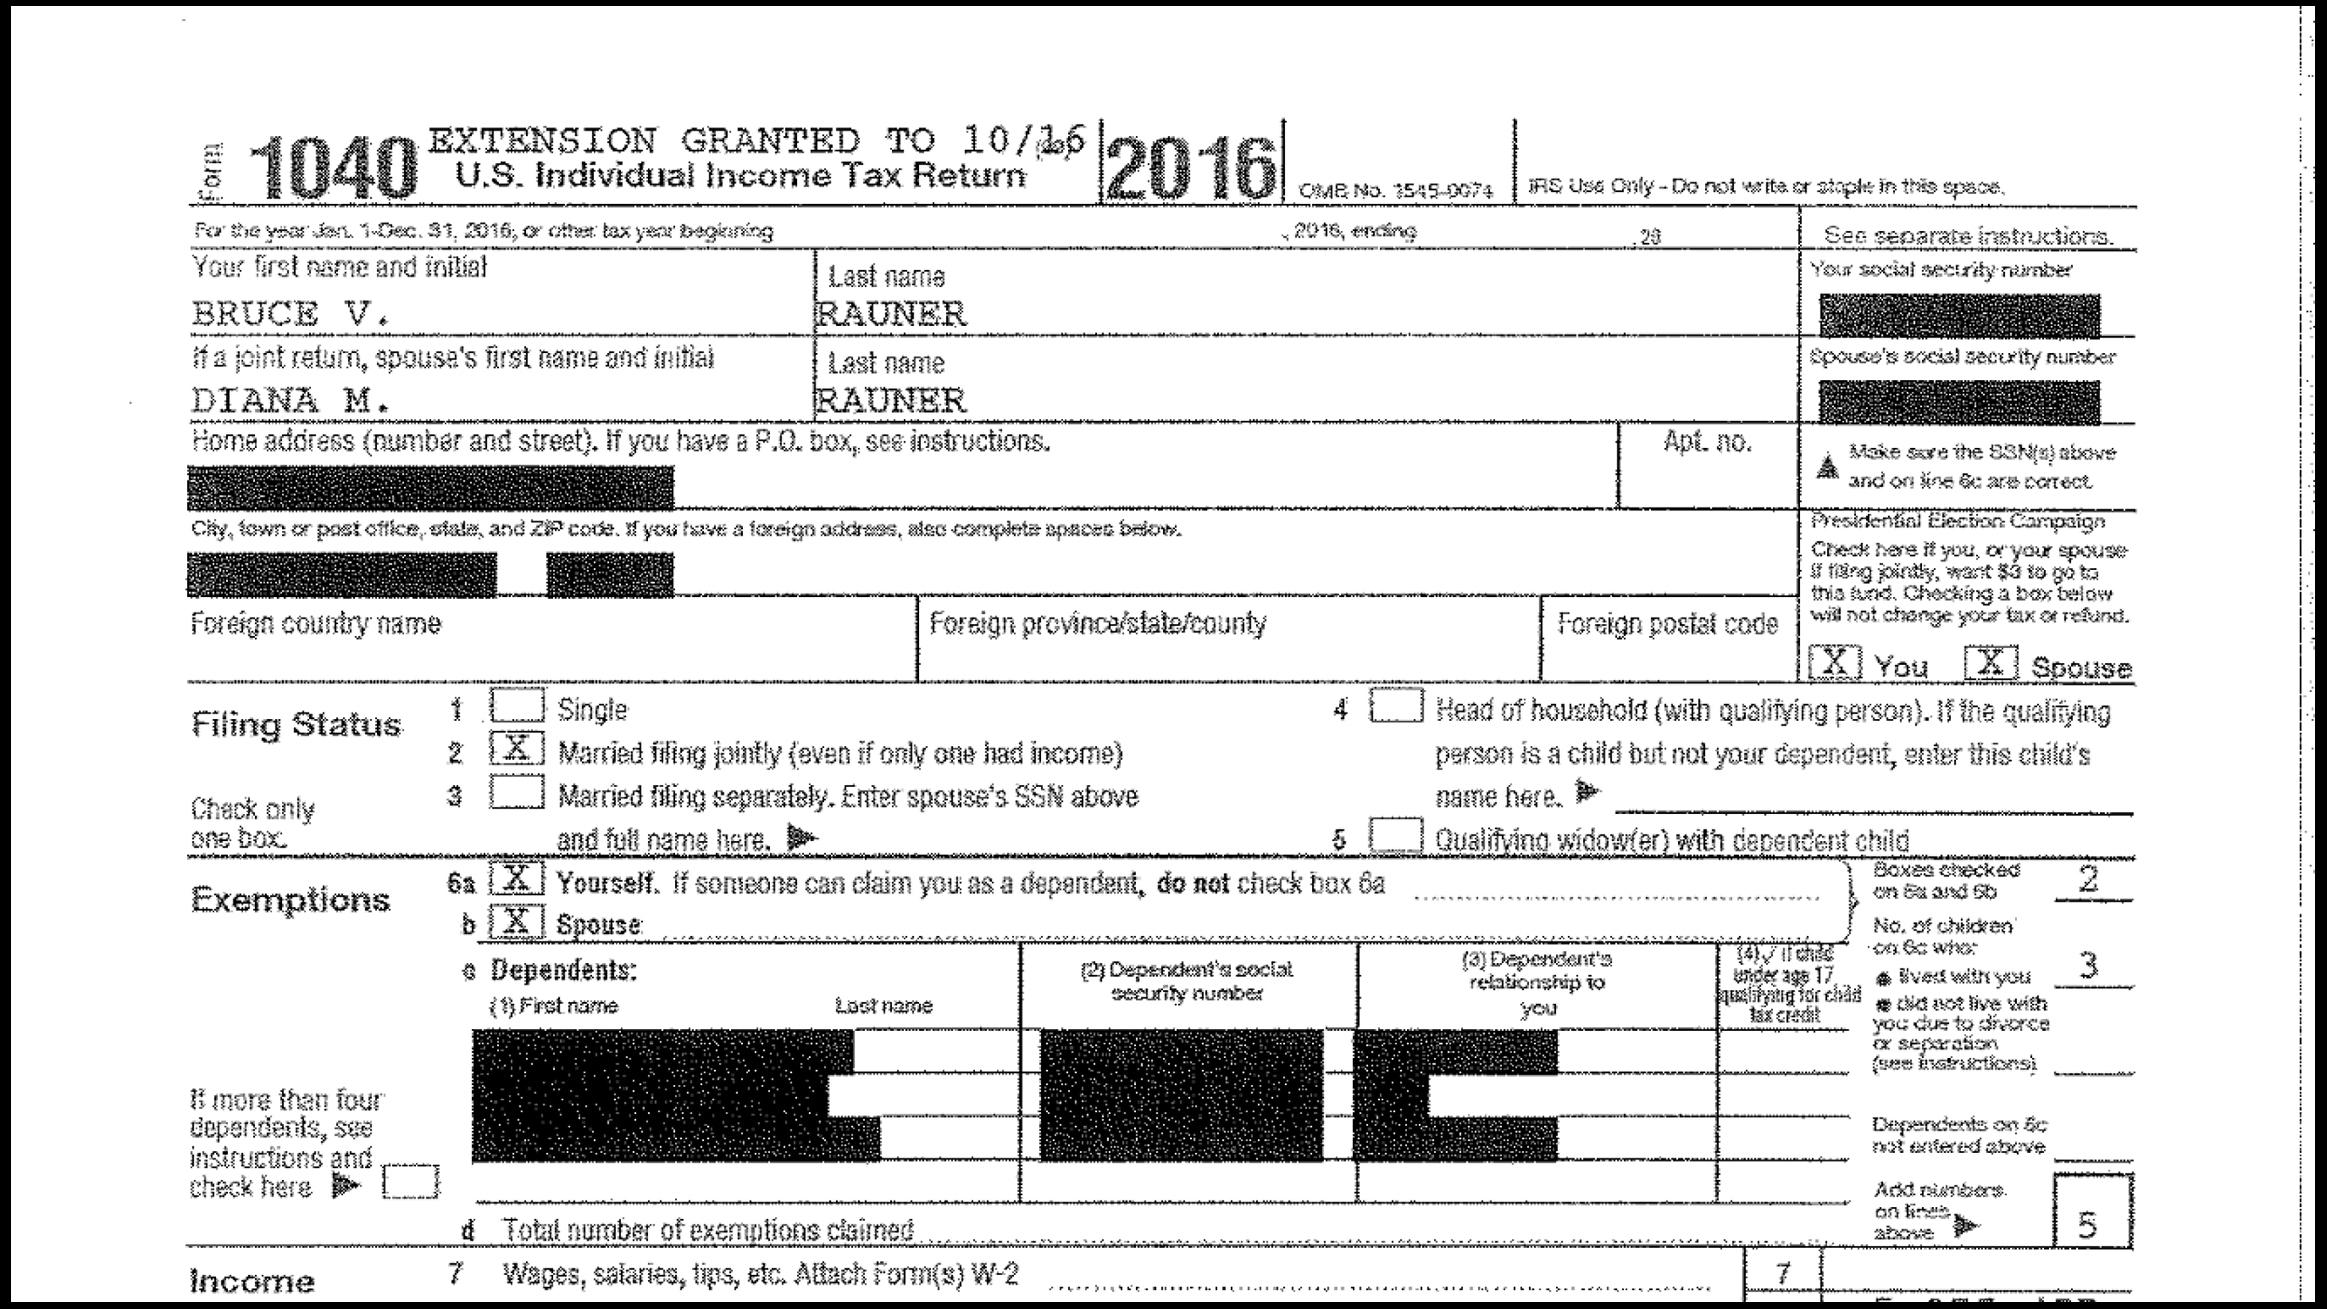 Document: Read the tax forms